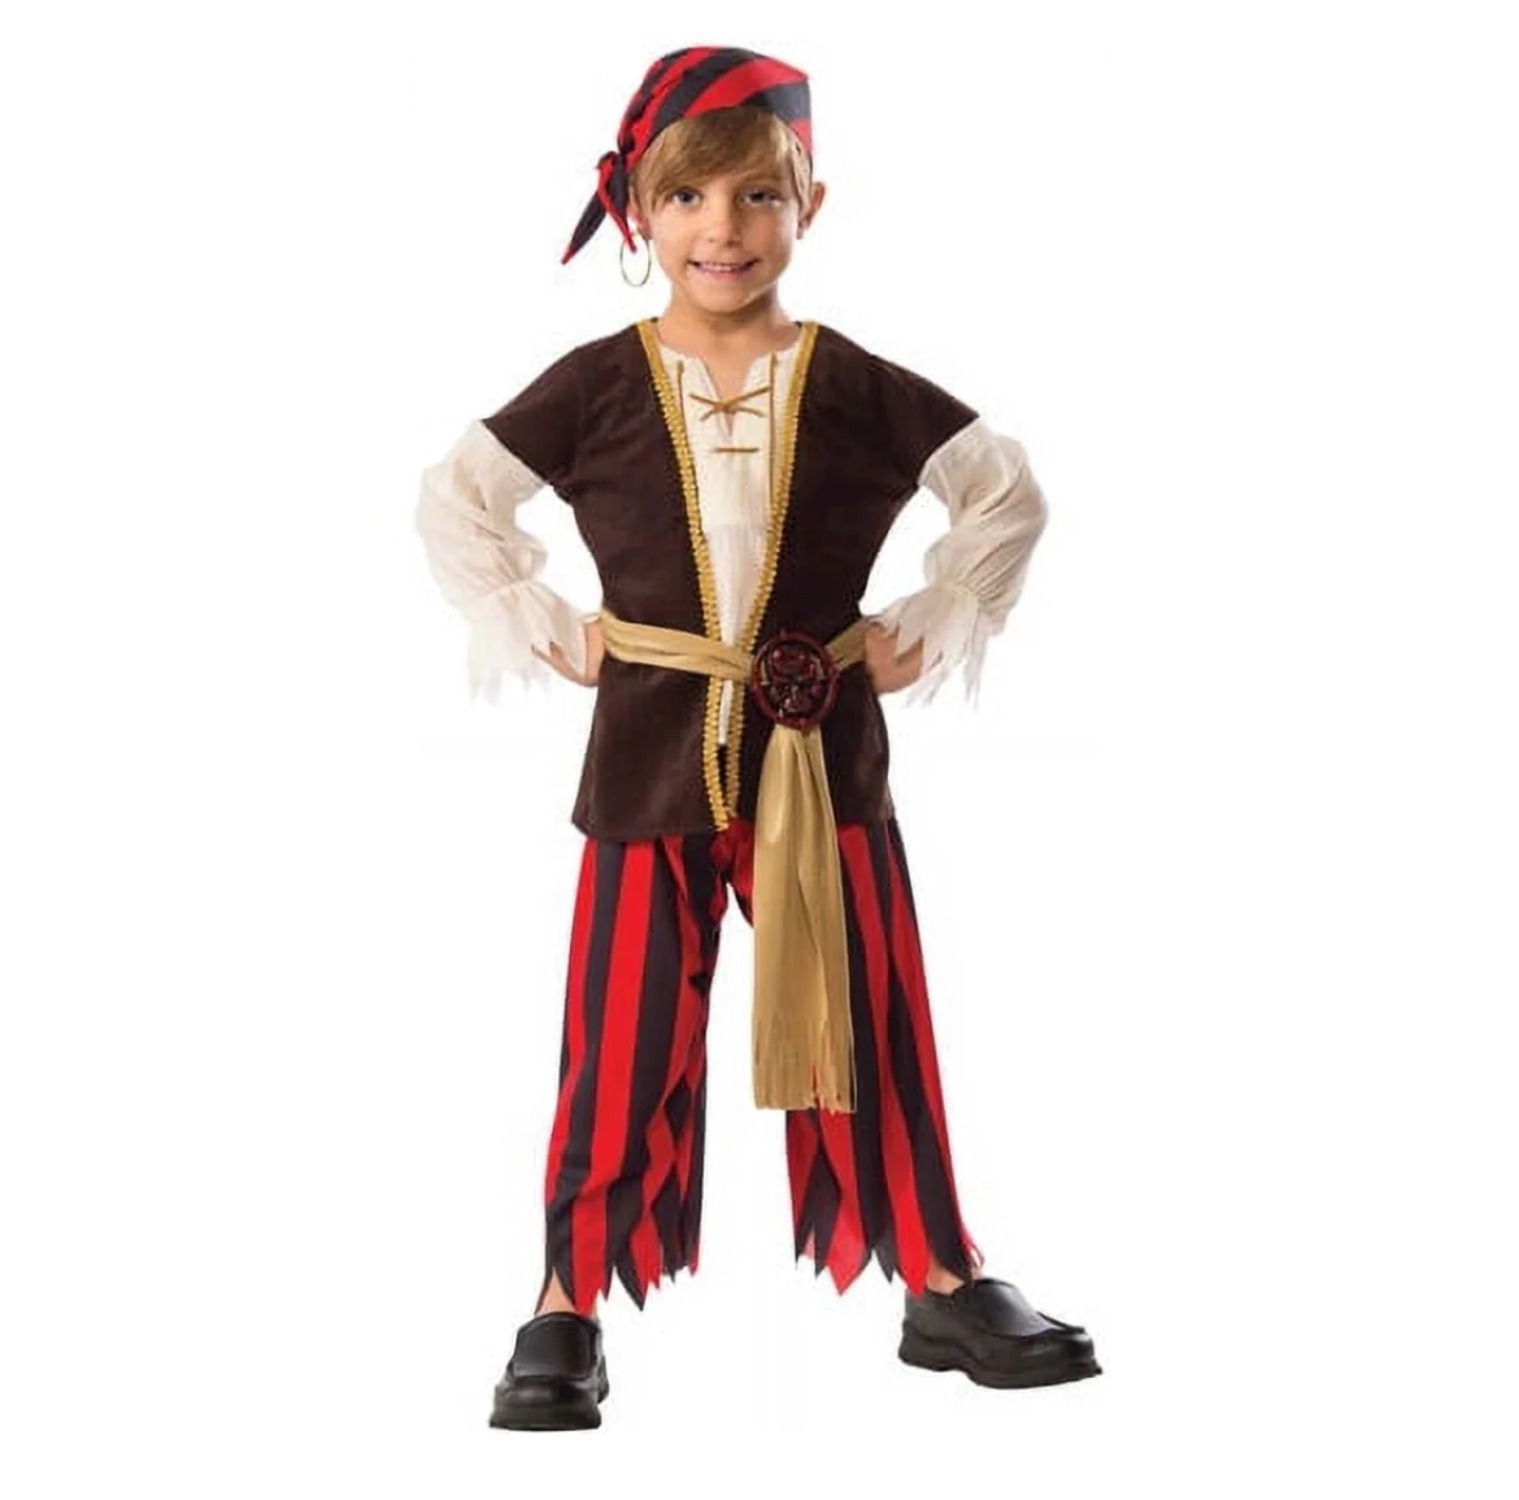 Pirate Matey Toddler Halloween Dress Up / Role Play Costume - image 2 of 2